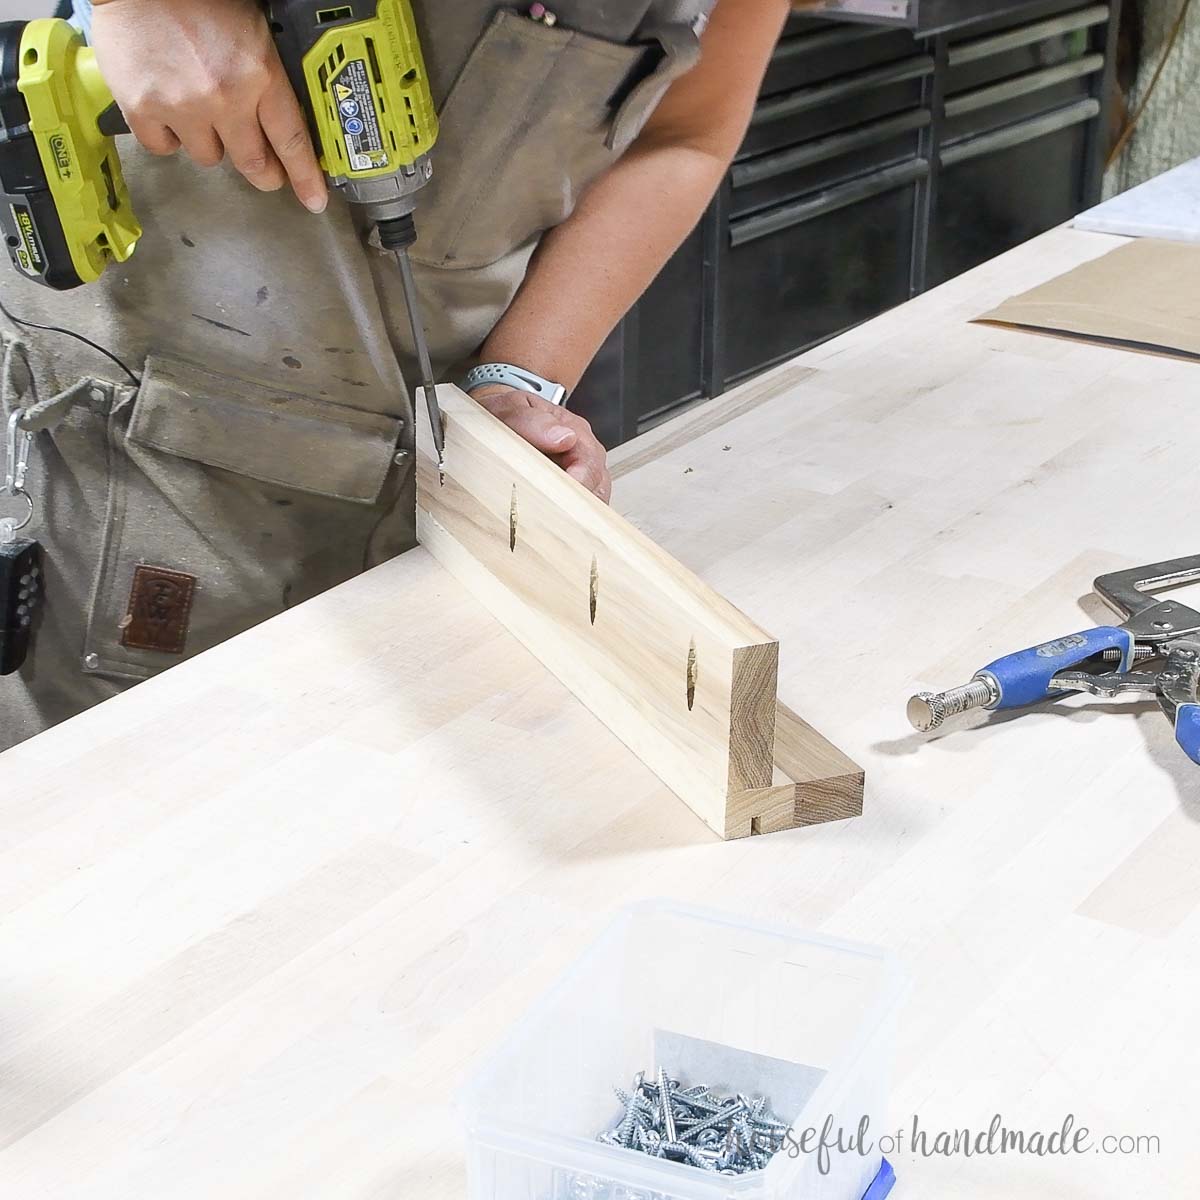 Attaching shelf pieces together with screws. 